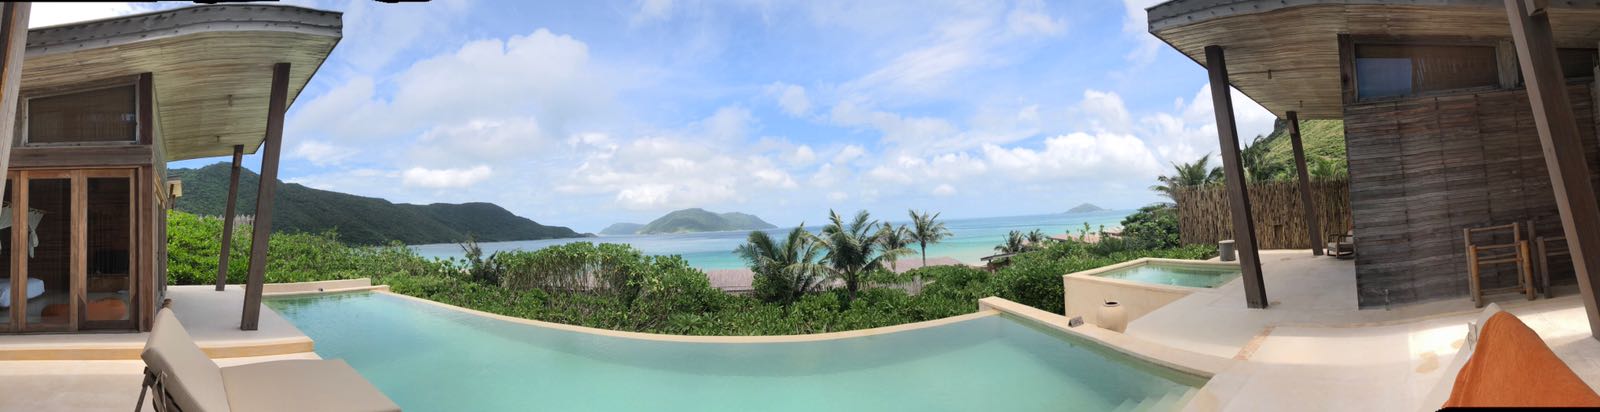 Review of Six Senses Con Dao resort - private pool view